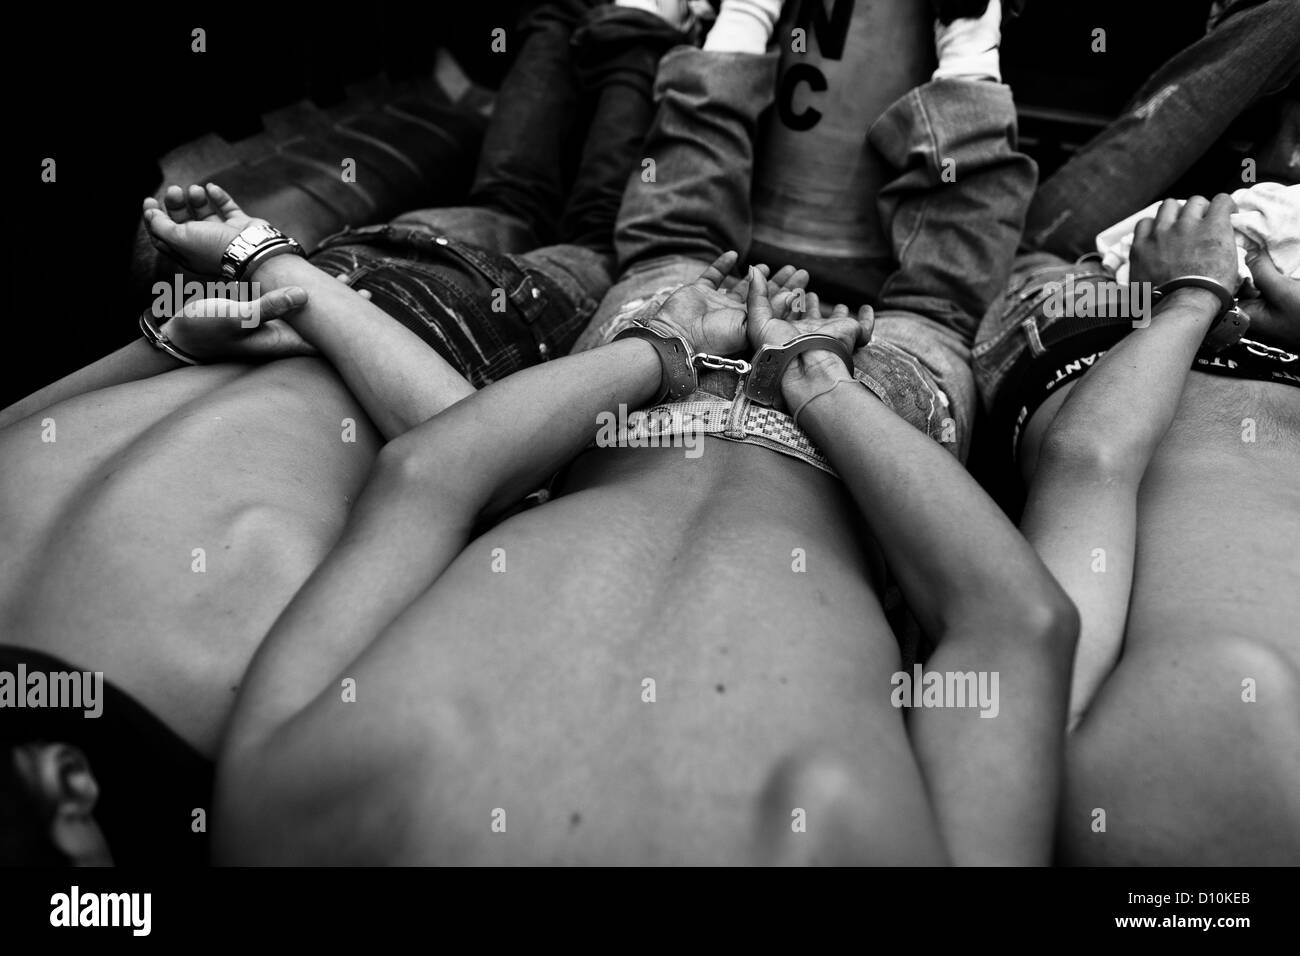 Young men, supposed gang members, lie handcuffed in the Police pick-up truck in San Salvador, El Salvador. Stock Photo